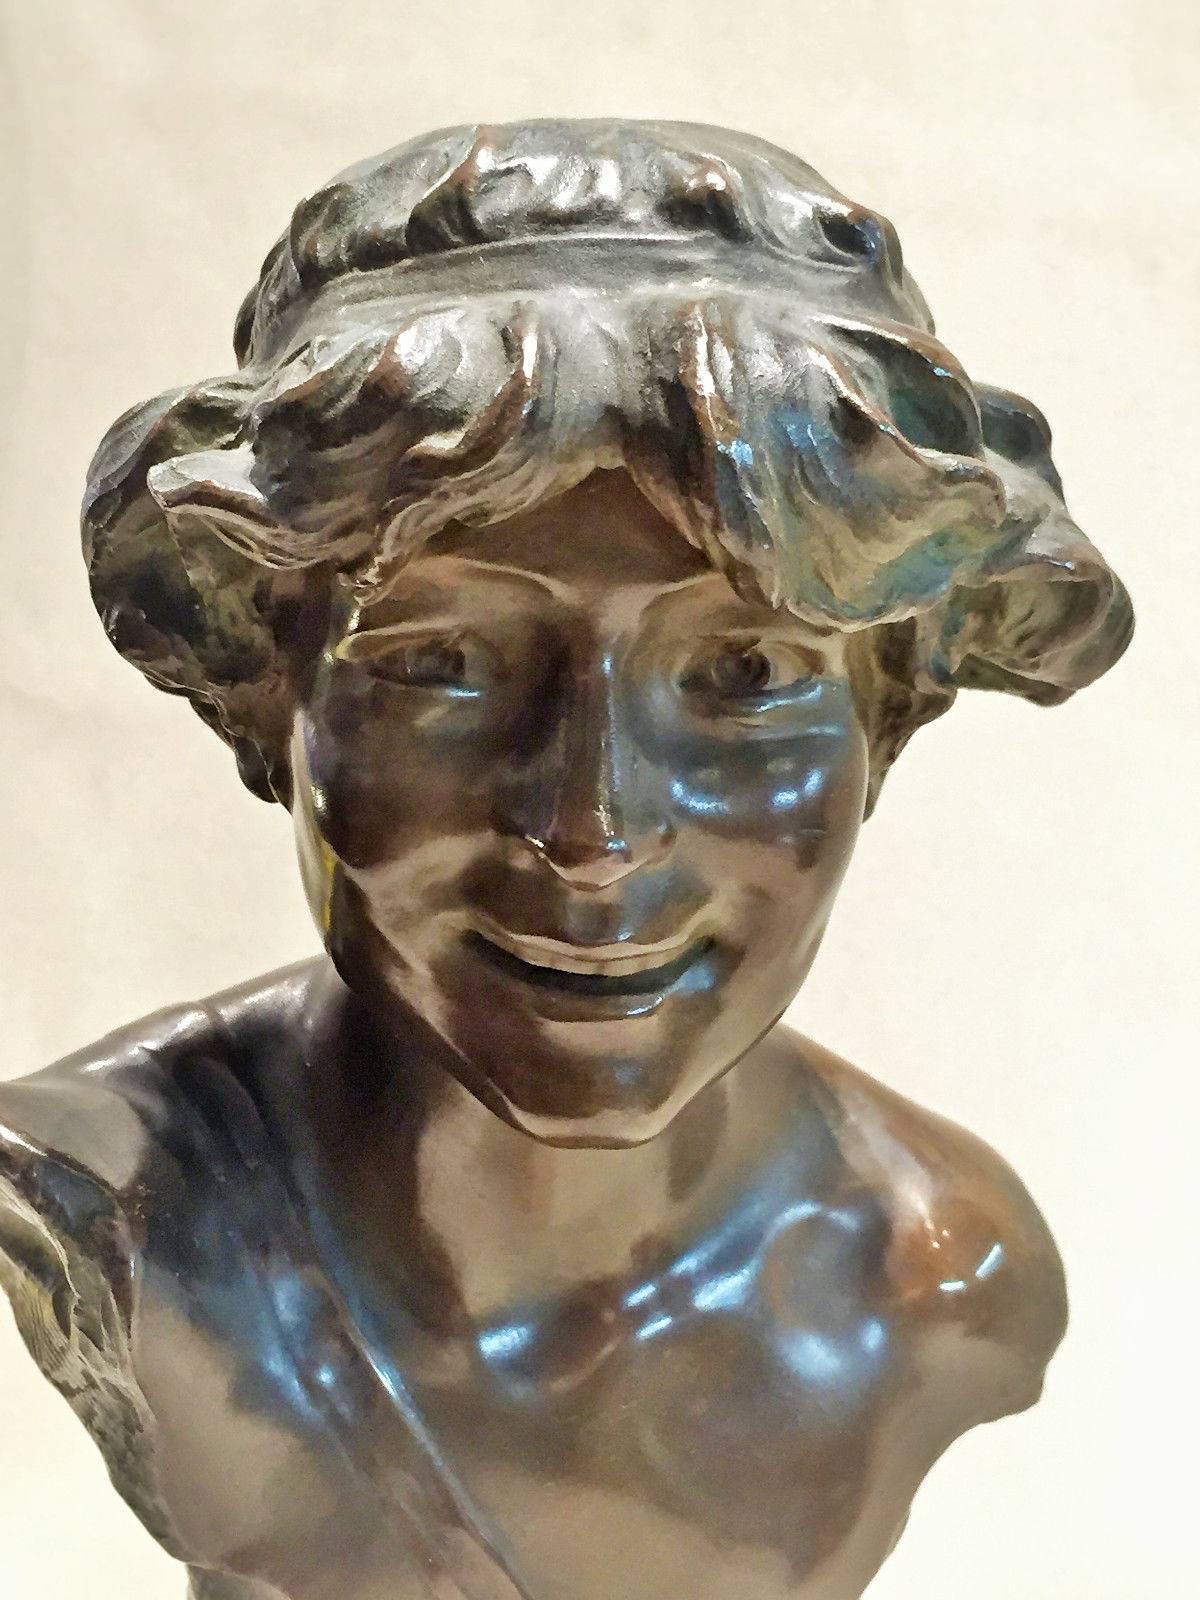 Made of a beautifully crafted dark-brown patinated bronze, this wonderful bust of a laughing girl proudly stands on its original marble base and bears artist's signature, A. Charroi, as well as unidentified diamond-shape foundry mark and bronze